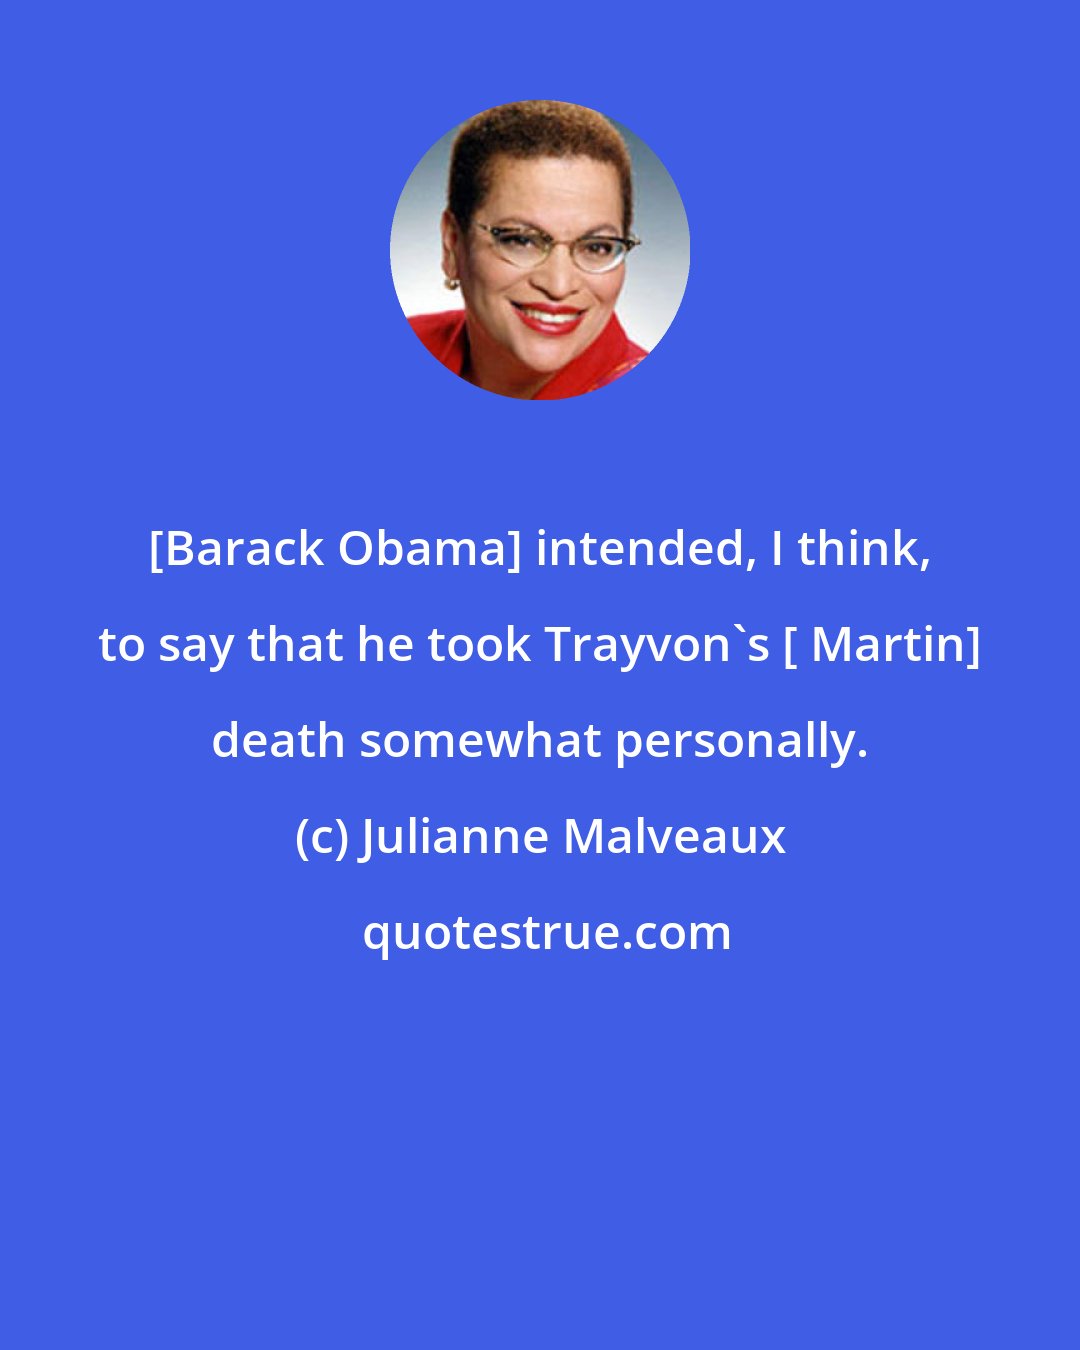 Julianne Malveaux: [Barack Obama] intended, I think, to say that he took Trayvon's [ Martin] death somewhat personally.